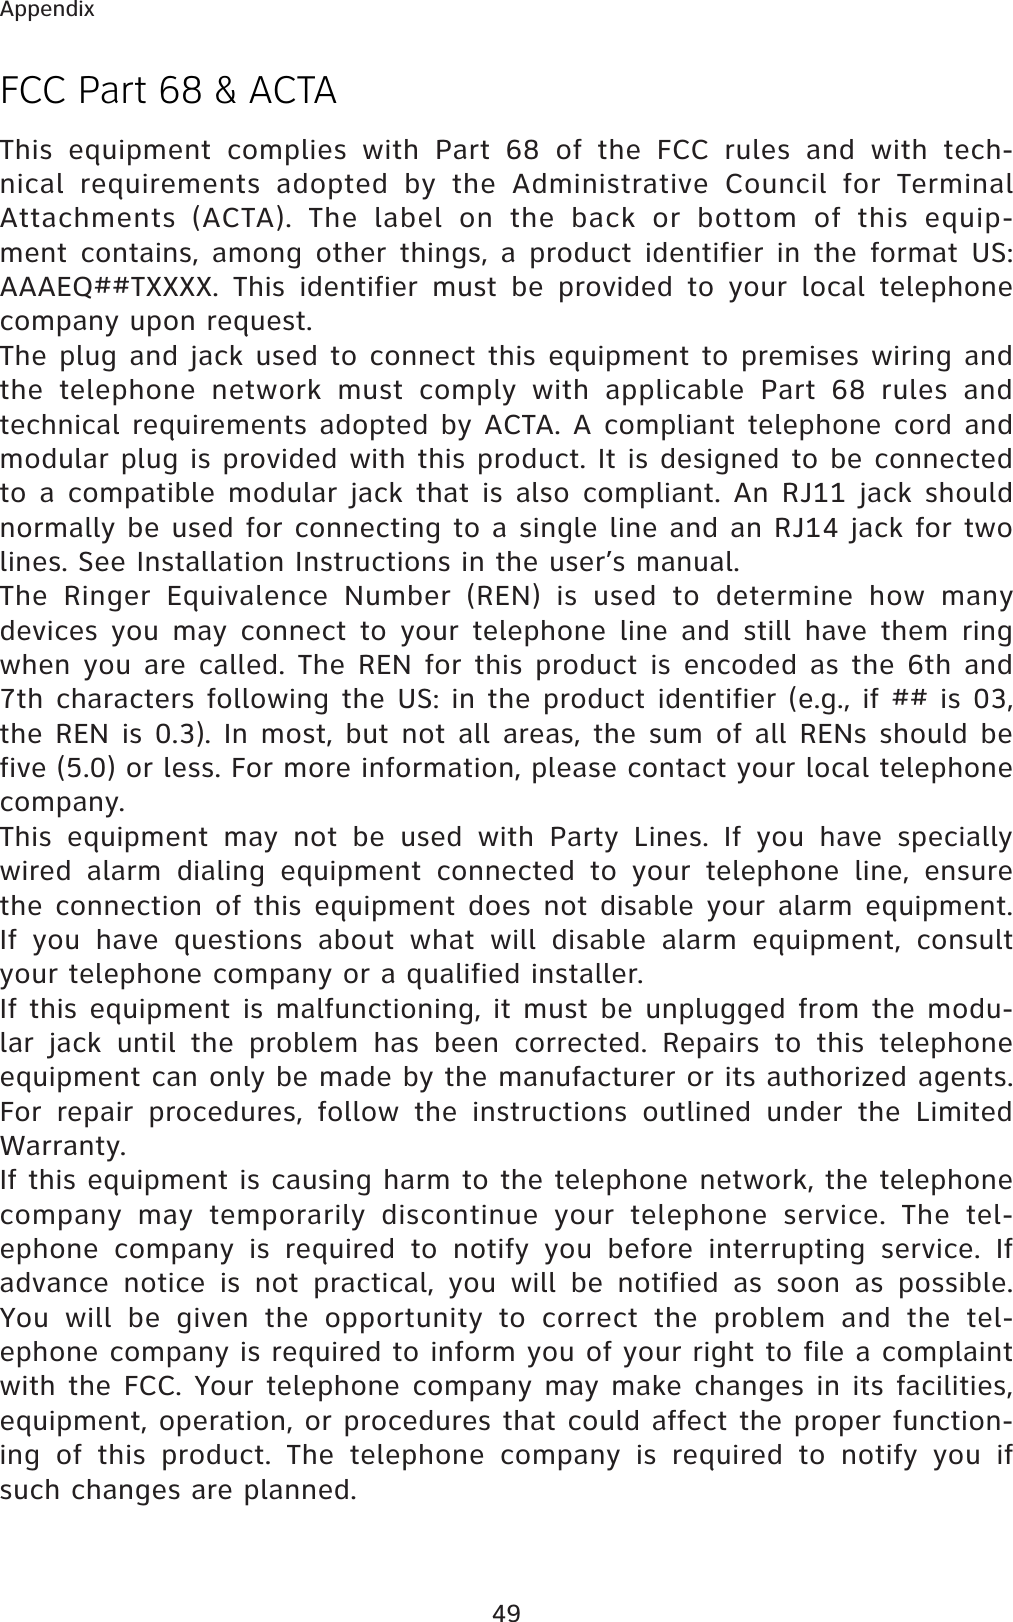 49AppendixFCC Part 68 &amp; ACTAThis equipment complies with Part 68 of the FCC rules and with tech-nical requirements adopted by the Administrative Council for Terminal Attachments (ACTA). The label on the back or bottom of this equip-ment contains, among other things, a product identifier in the format US:AAAEQ##TXXXX. This identifier must be provided to your local telephone company upon request.The plug and jack used to connect this equipment to premises wiring and the telephone network must comply with applicable Part 68 rules and technical requirements adopted by ACTA. A compliant telephone cord and modular plug is provided with this product. It is designed to be connected to a compatible modular jack that is also compliant. An RJ11 jack should normally be used for connecting to a single line and an RJ14 jack for two lines. See Installation Instructions in the user’s manual.The Ringer Equivalence Number (REN) is used to determine how many devices you may connect to your telephone line and still have them ring when you are called. The REN for this product is encoded as the 6th and 7th characters following the US: in the product identifier (e.g., if ## is 03, the REN is 0.3). In most, but not all areas, the sum of all RENs should be five (5.0) or less. For more information, please contact your local telephone company.This equipment may not be used with Party Lines. If you have specially wired alarm dialing equipment connected to your telephone line, ensure the connection of this equipment does not disable your alarm equipment. If you have questions about what will disable alarm equipment, consult your telephone company or a qualified installer.If this equipment is malfunctioning, it must be unplugged from the modu-lar jack until the problem has been corrected. Repairs to this telephone equipment can only be made by the manufacturer or its authorized agents. For repair procedures, follow the instructions outlined under the Limited Warranty.If this equipment is causing harm to the telephone network, the telephone company may temporarily discontinue your telephone service. The tel-ephone company is required to notify you before interrupting service. If advance notice is not practical, you will be notified as soon as possible. You will be given the opportunity to correct the problem and the tel-ephone company is required to inform you of your right to file a complaint with the FCC. Your telephone company may make changes in its facilities, equipment, operation, or procedures that could affect the proper function-ing of this product. The telephone company is required to notify you if such changes are planned.